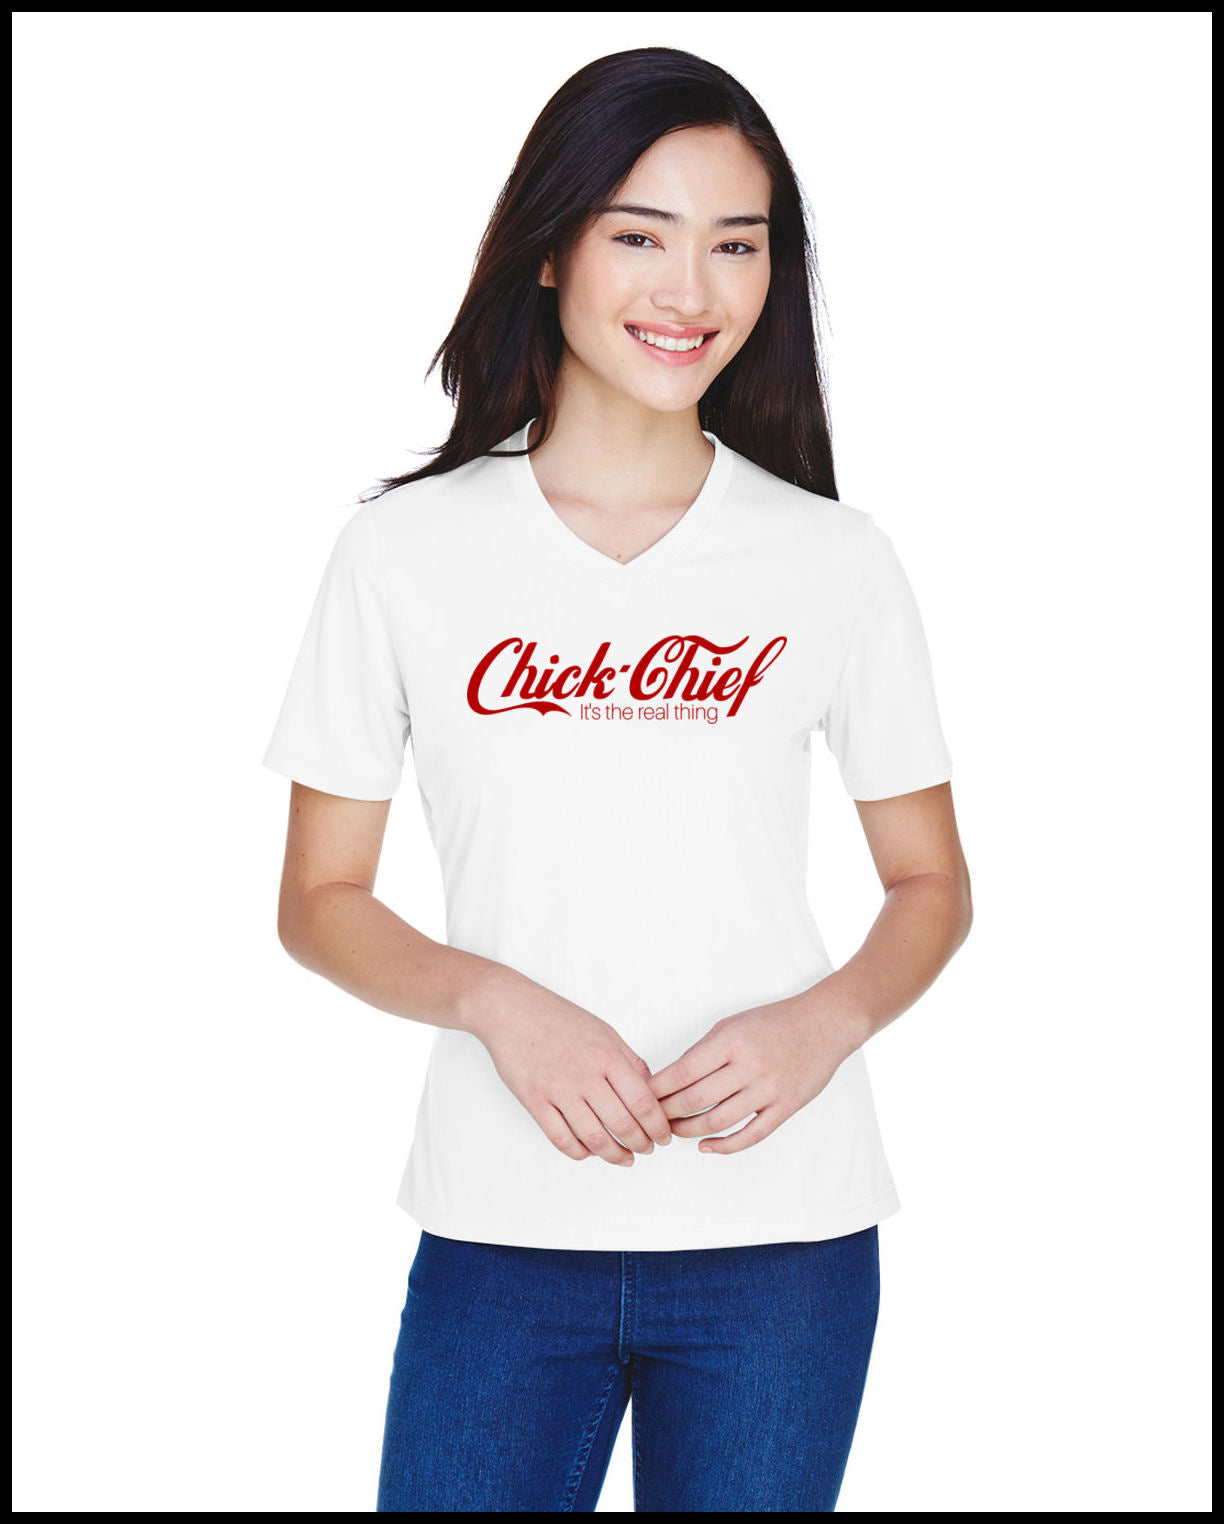 Chick Chief Real Thing White T-Shirt